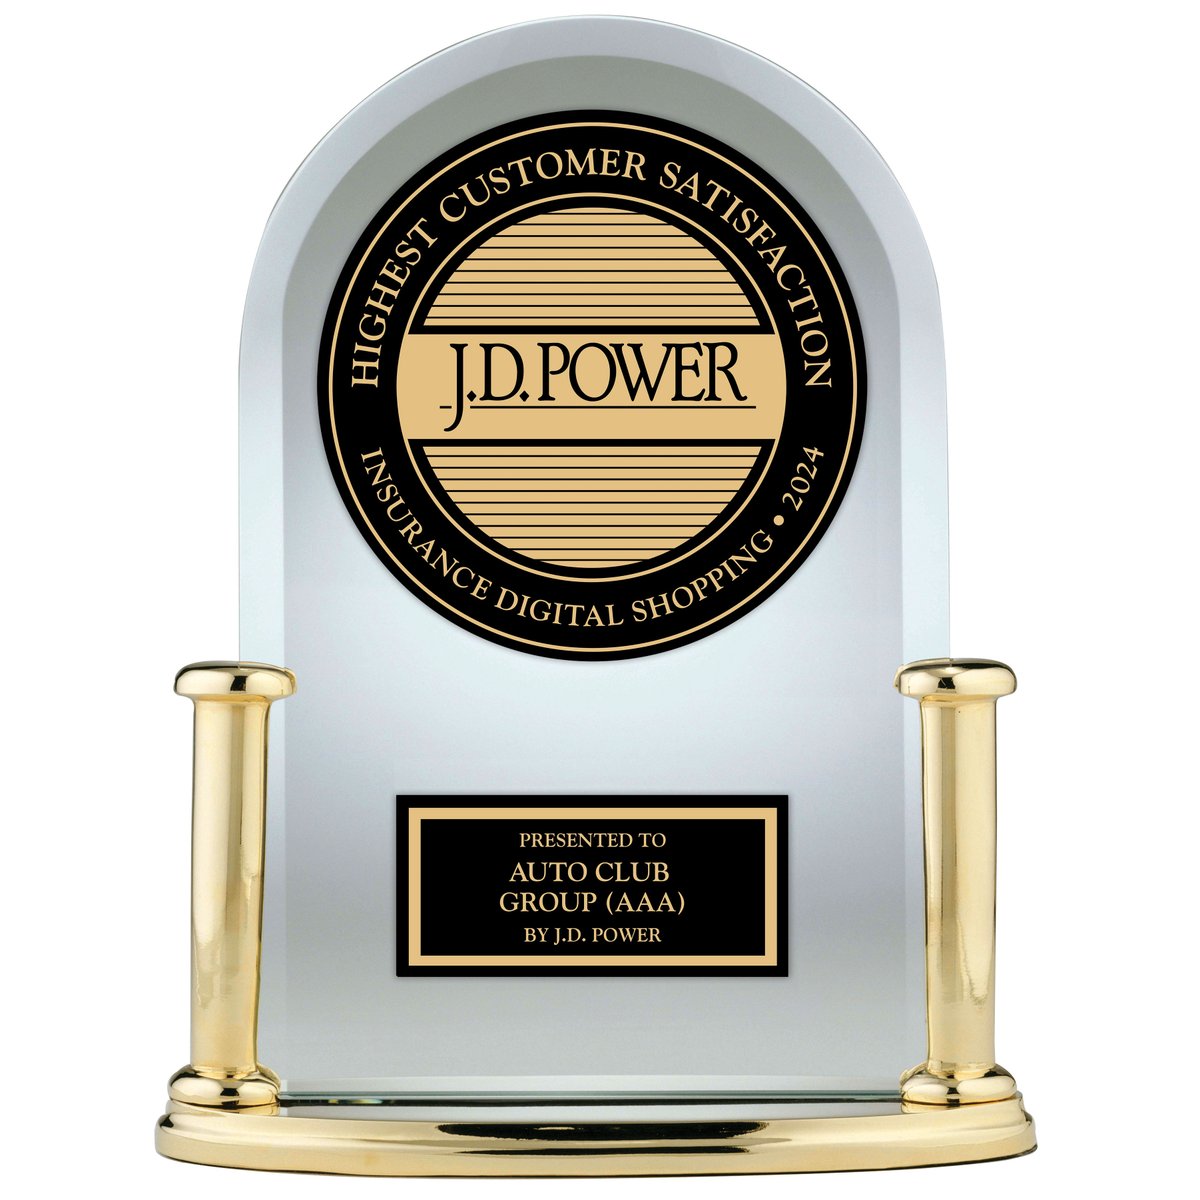 We’re honored! We've been ranked #1 by J.D. Power for our “Digital Insurance Shopping Experience.” Thank you to our dedicated team and valued members for helping us achieve this recognition. 

More here: bit.ly/4bNeuf1
#JDPower #DigitalExcellence #Insurance